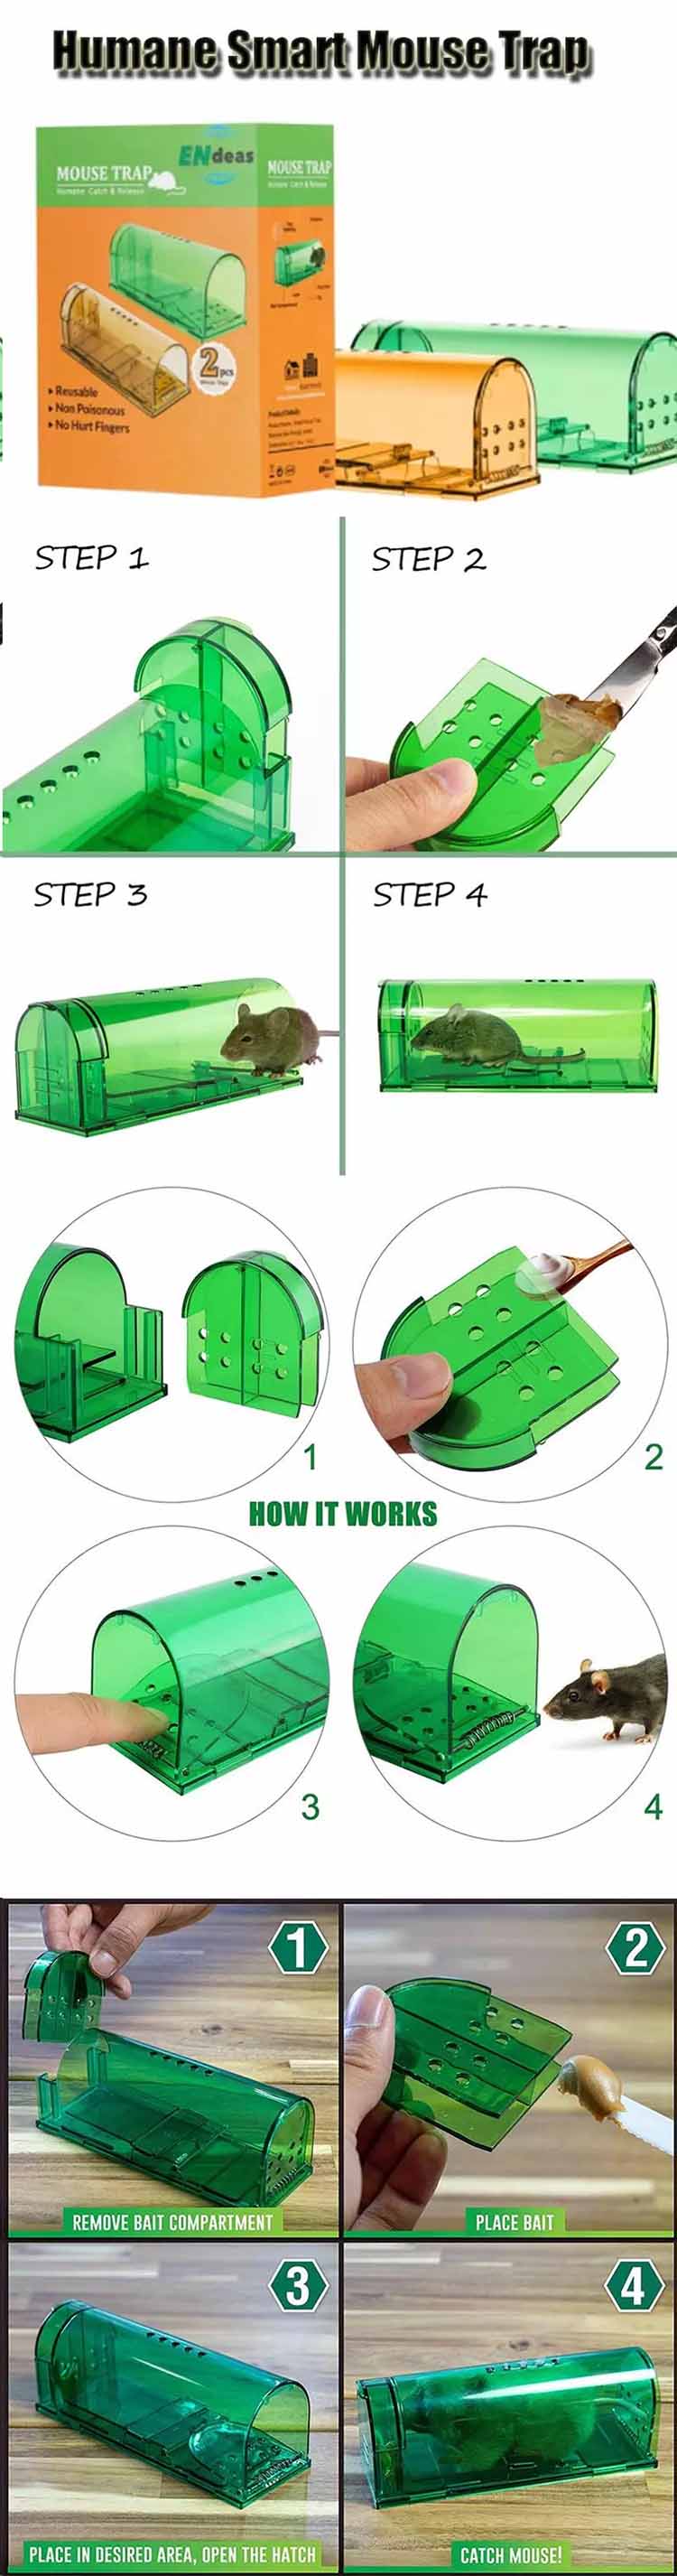 2019 Amazon Hot Sell Household Plastic Humane Live Catch Smart Mouse Rat Trap Mouse Trap Cage02